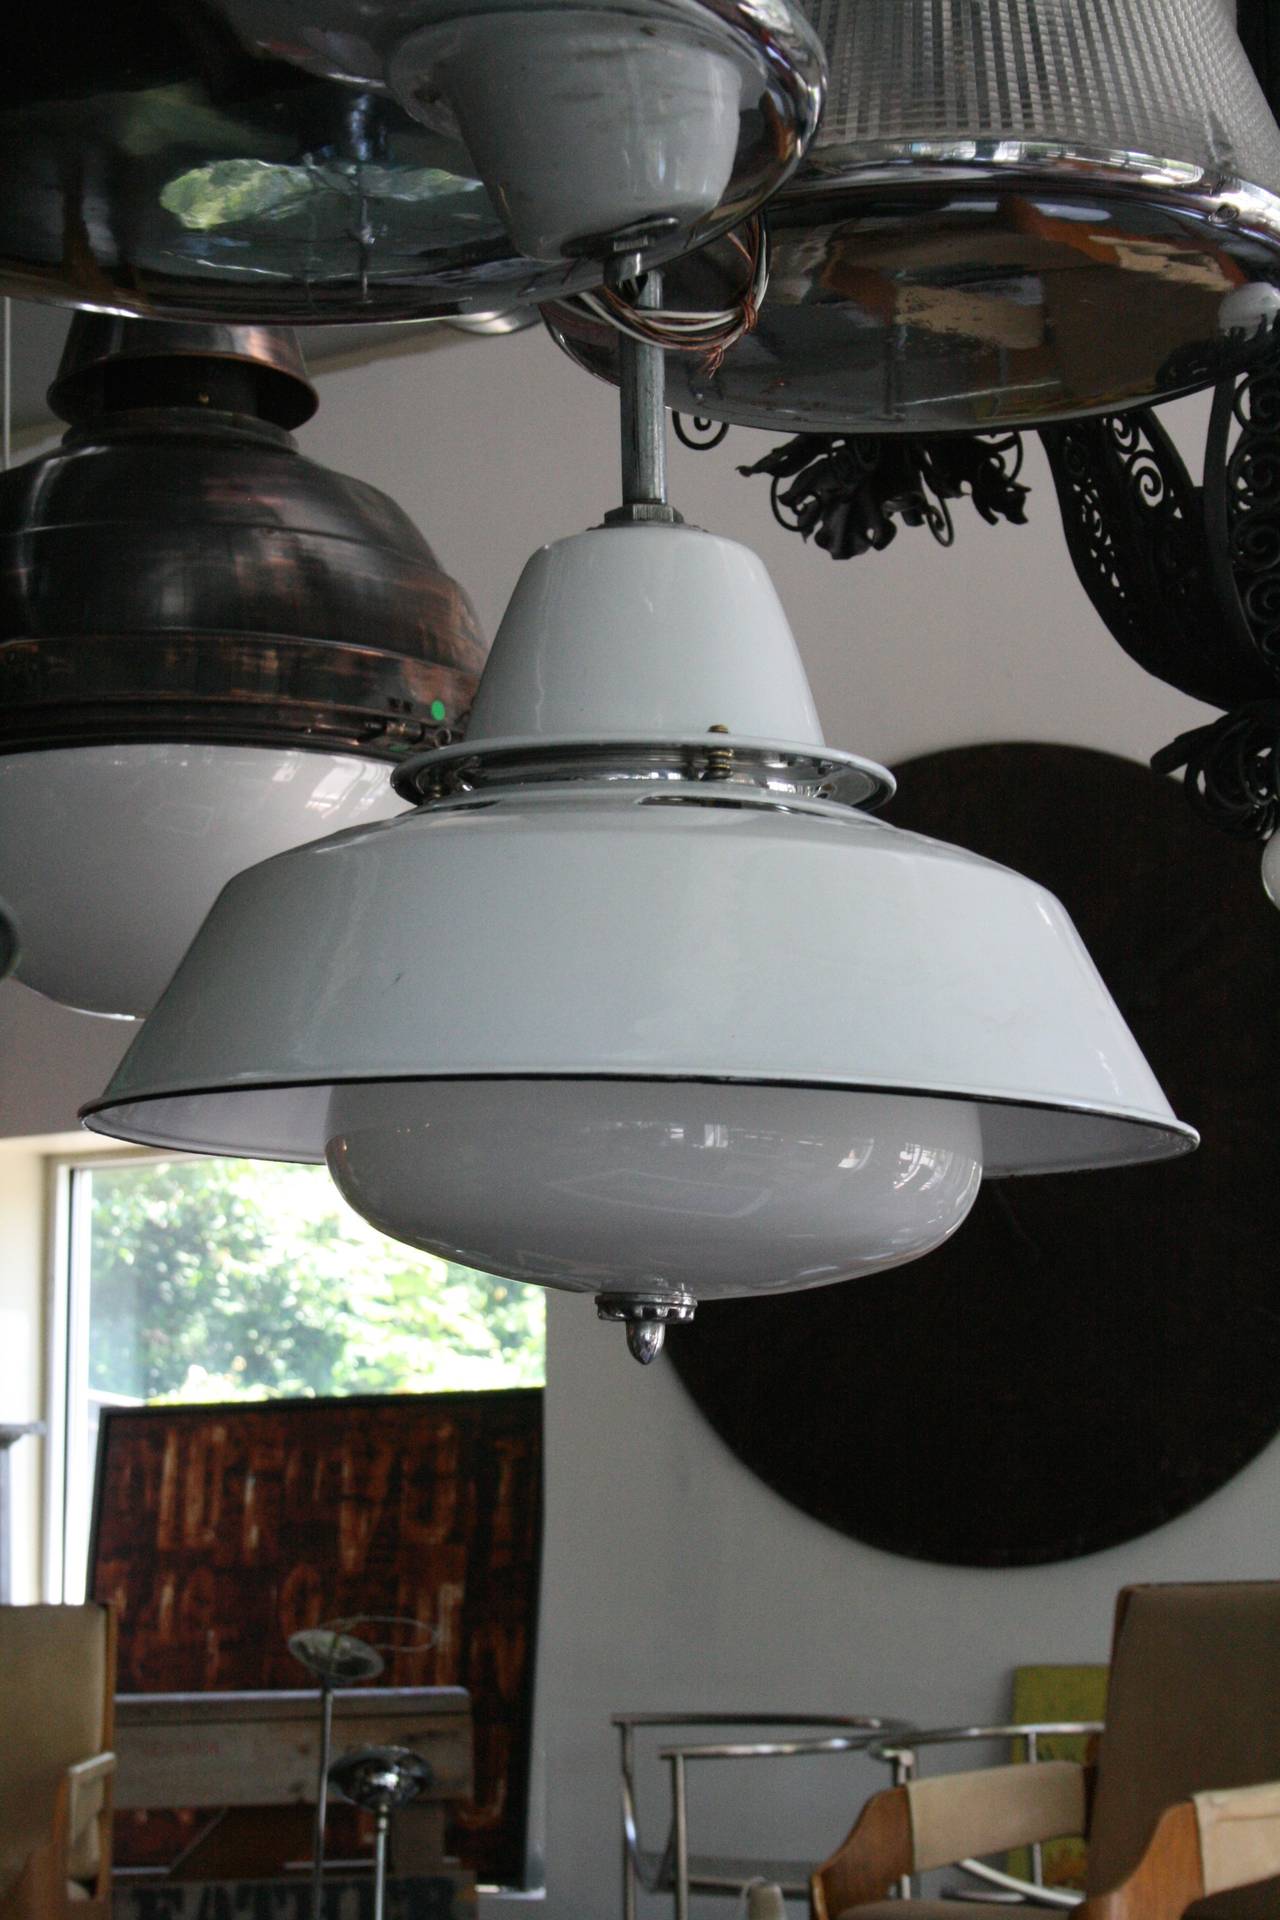 Charming enameled pendant lights with milk glass shades and nickel finial. 2 pieces available.